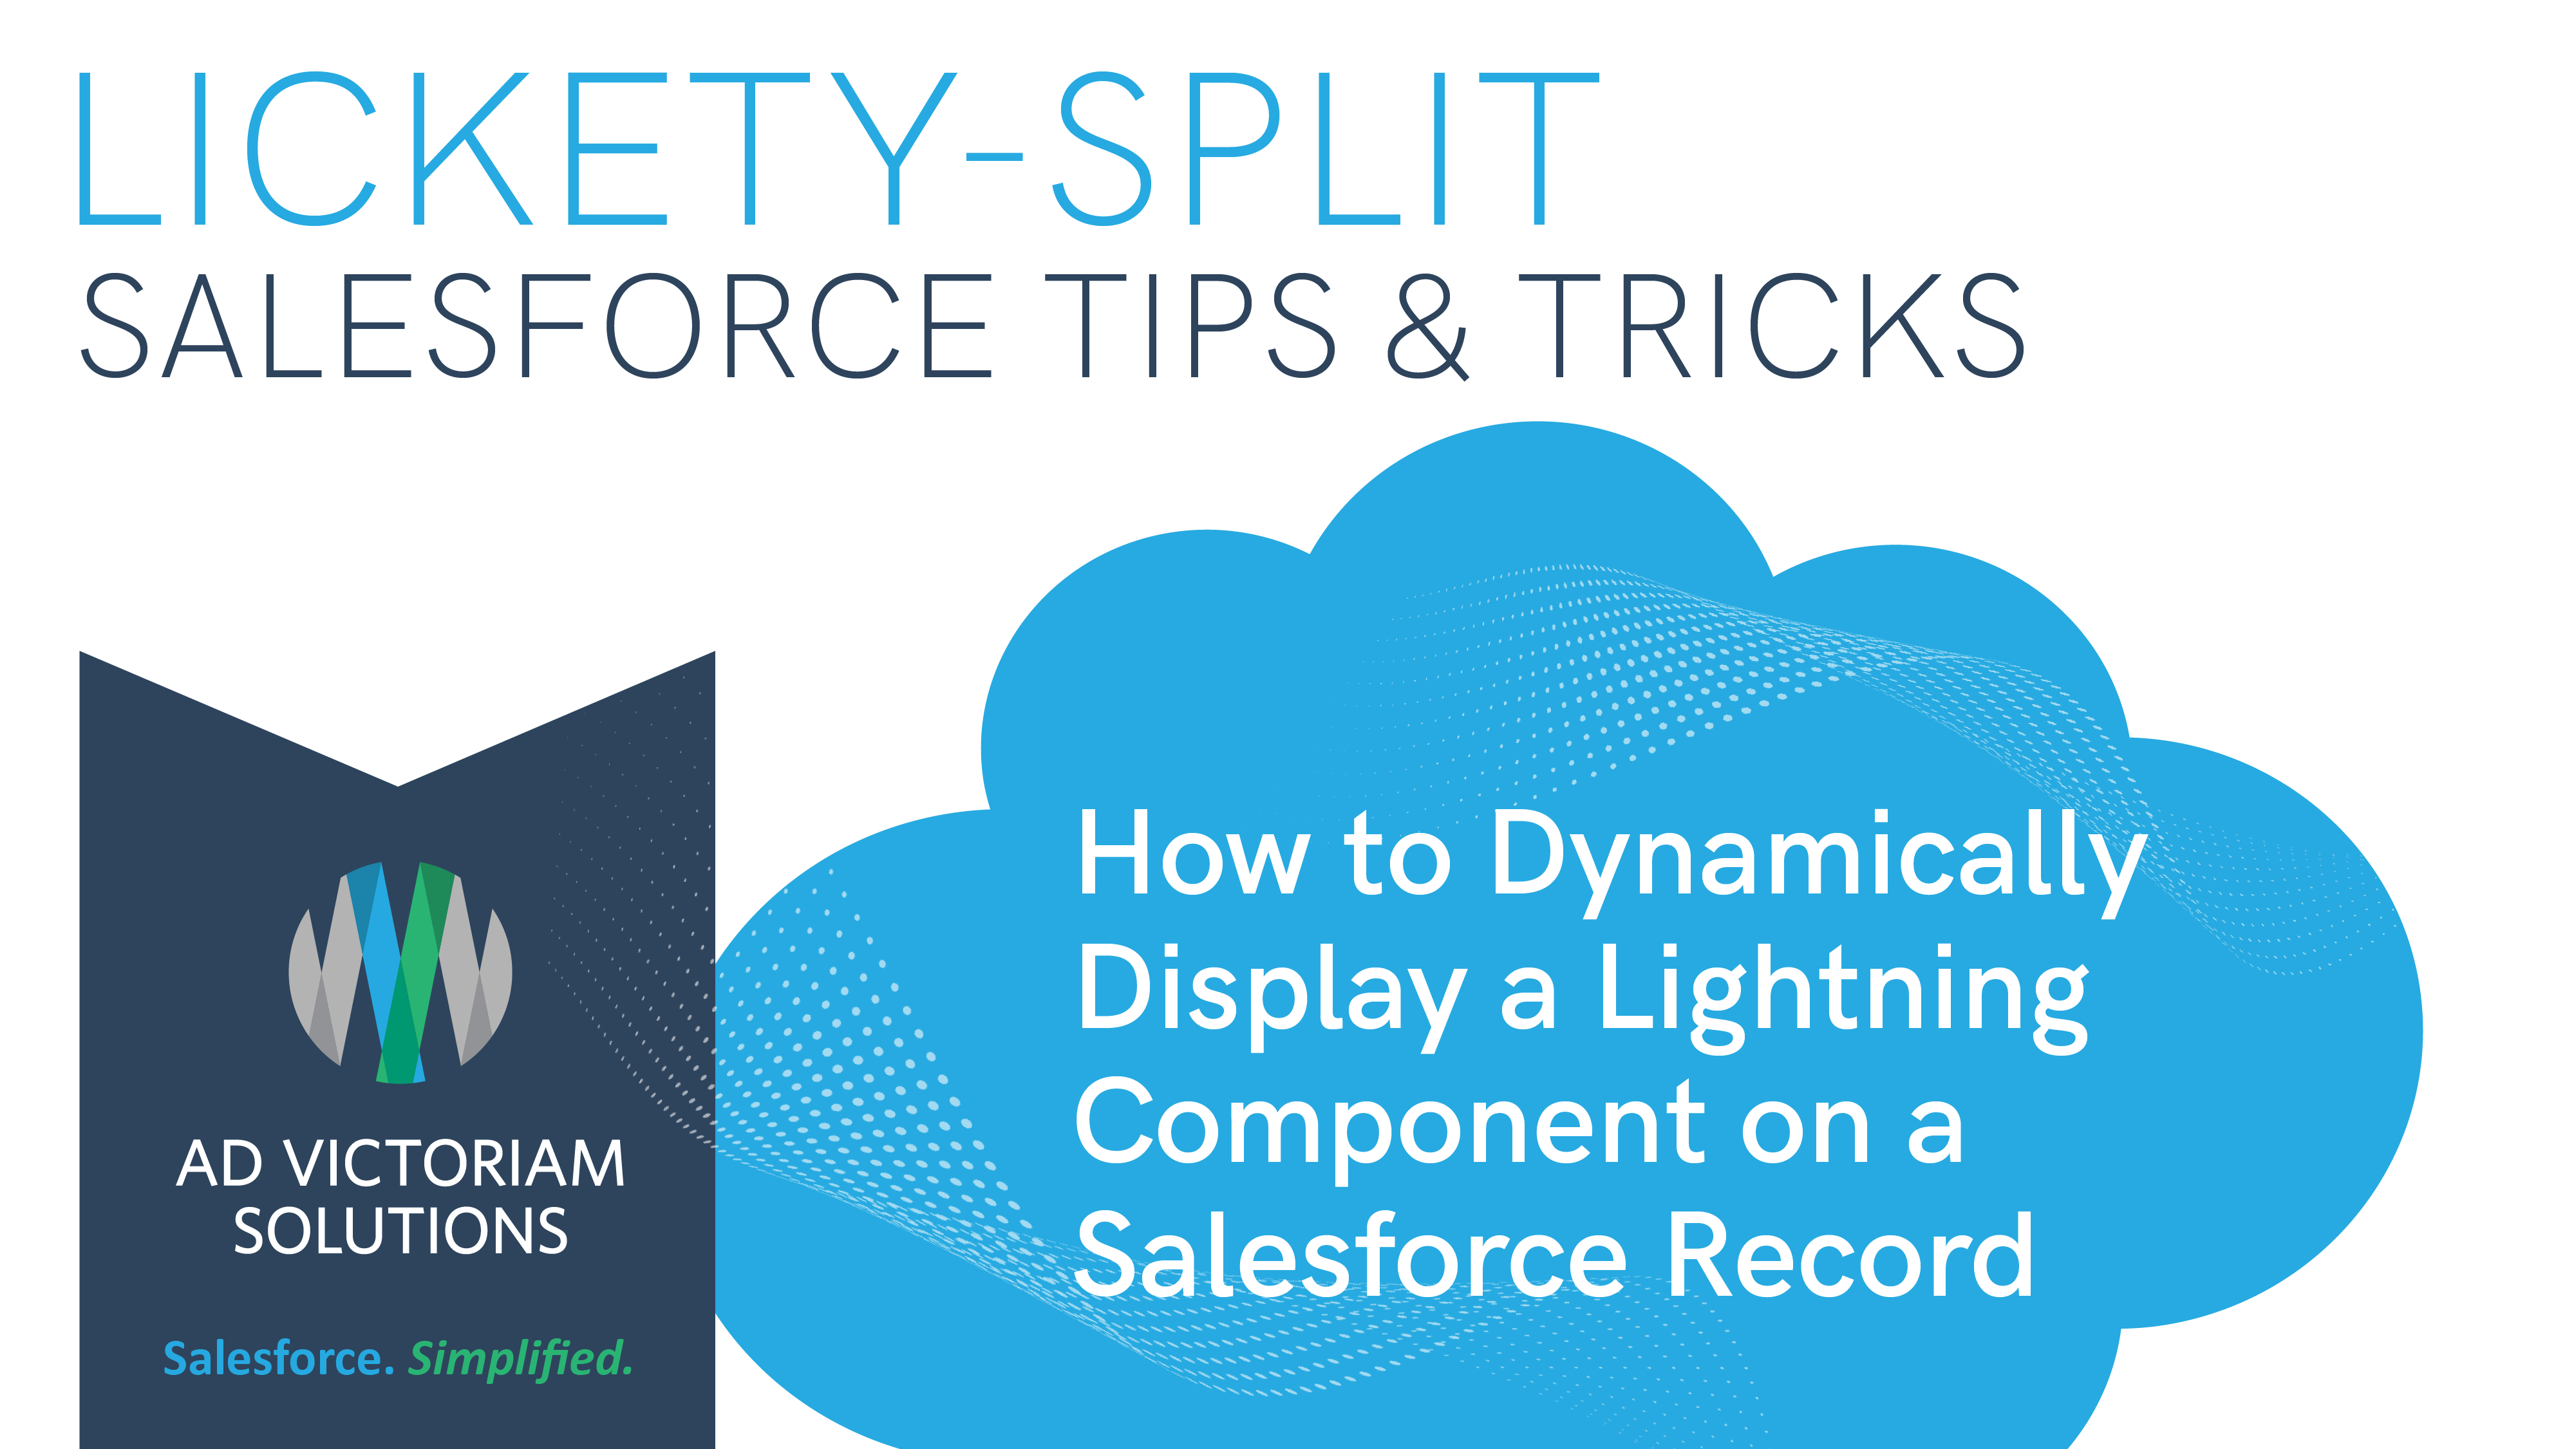 How to Dynamically Display a Lightning Component on a Salesforce Record